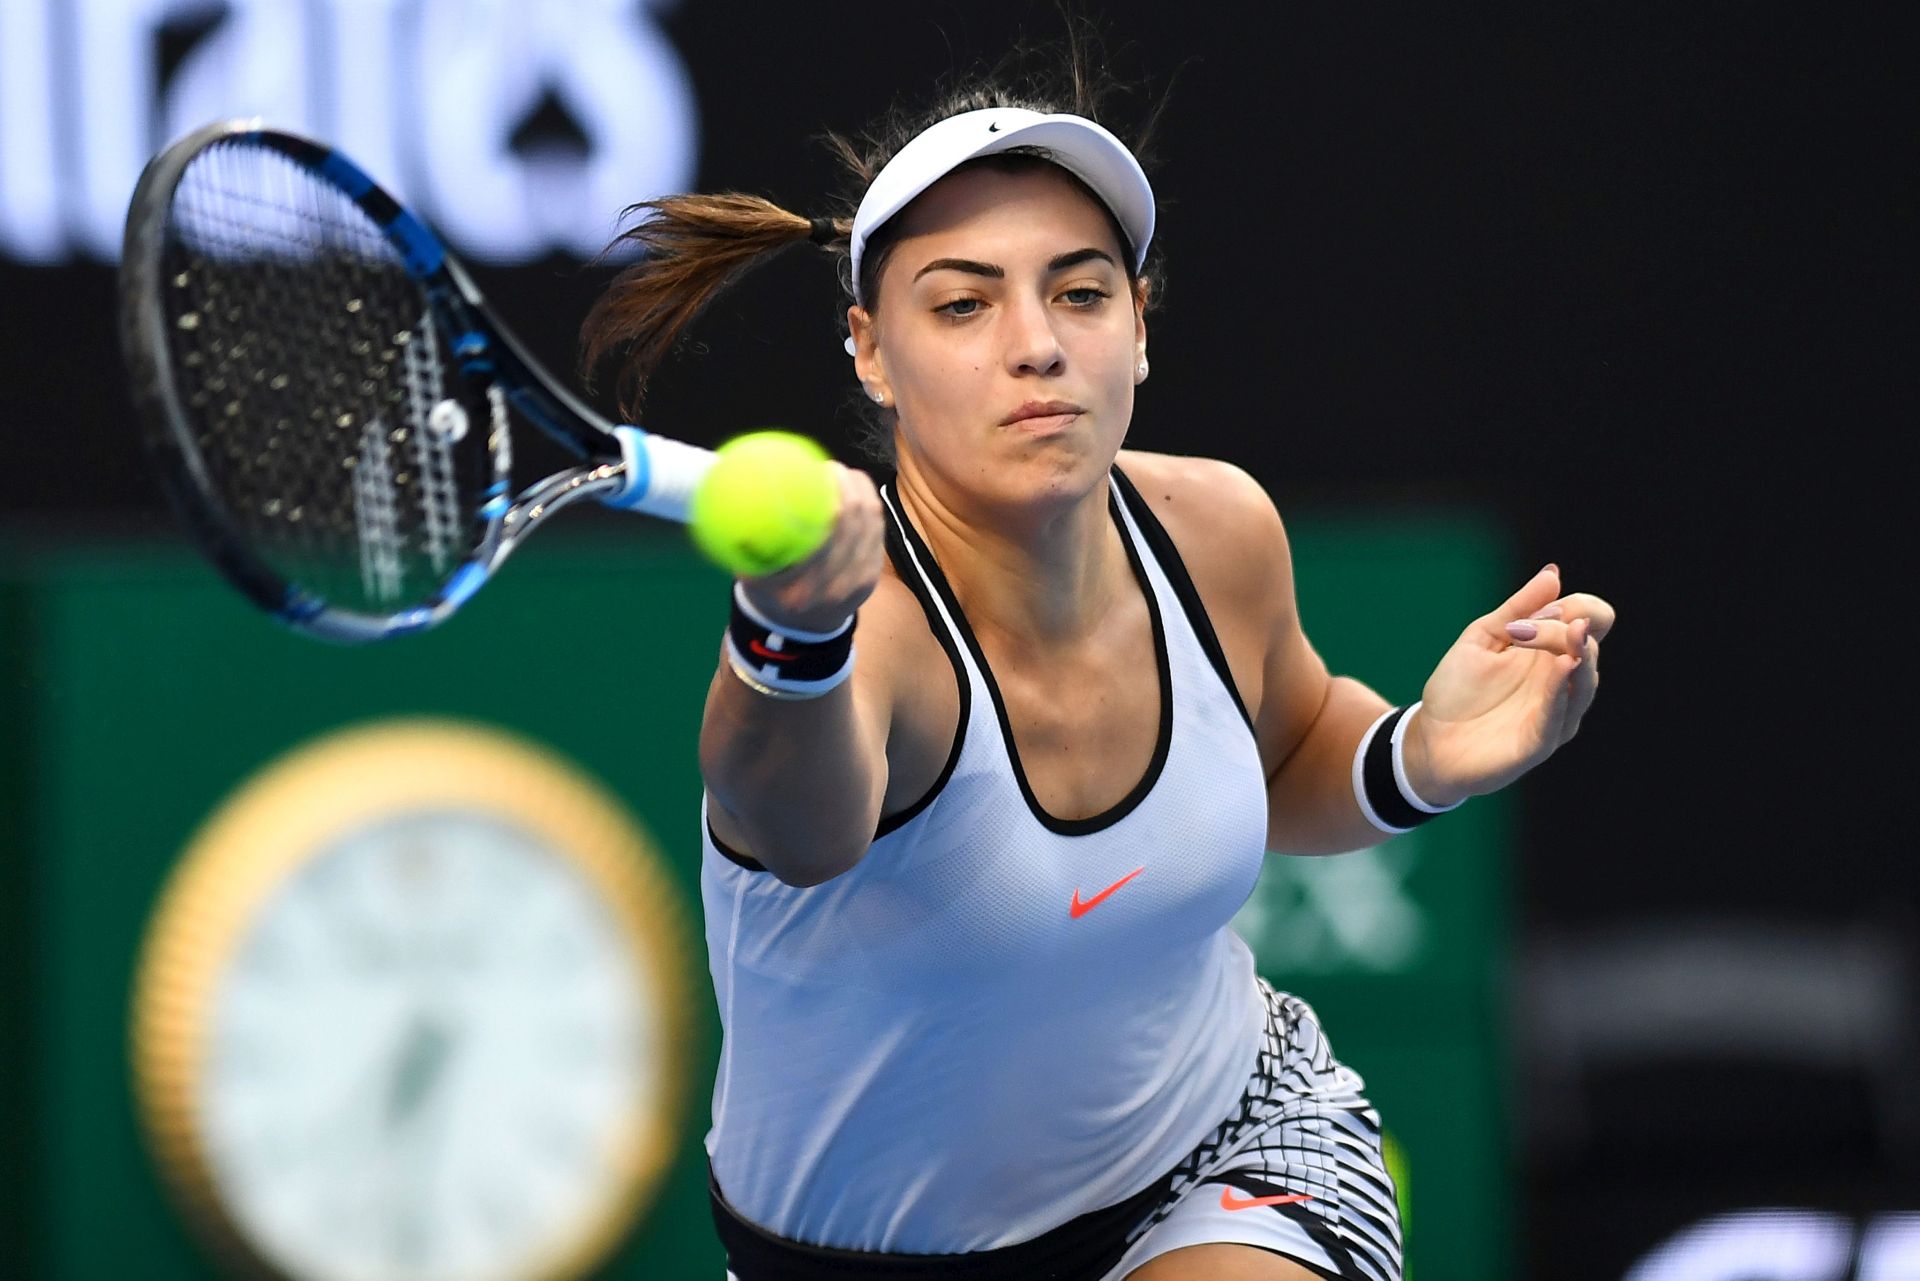 epa05730047 Ana Konjuh of Croatia in action against Daria Gavrilova of Australia during the Women's Singles match in round 2 at the Australian Open Grand Slam tennis tournament in Melbourne, Australia, 19 January 2017.  EPA/LUKAS COCH AUSTRALIA AND NEW ZEALAND OUT